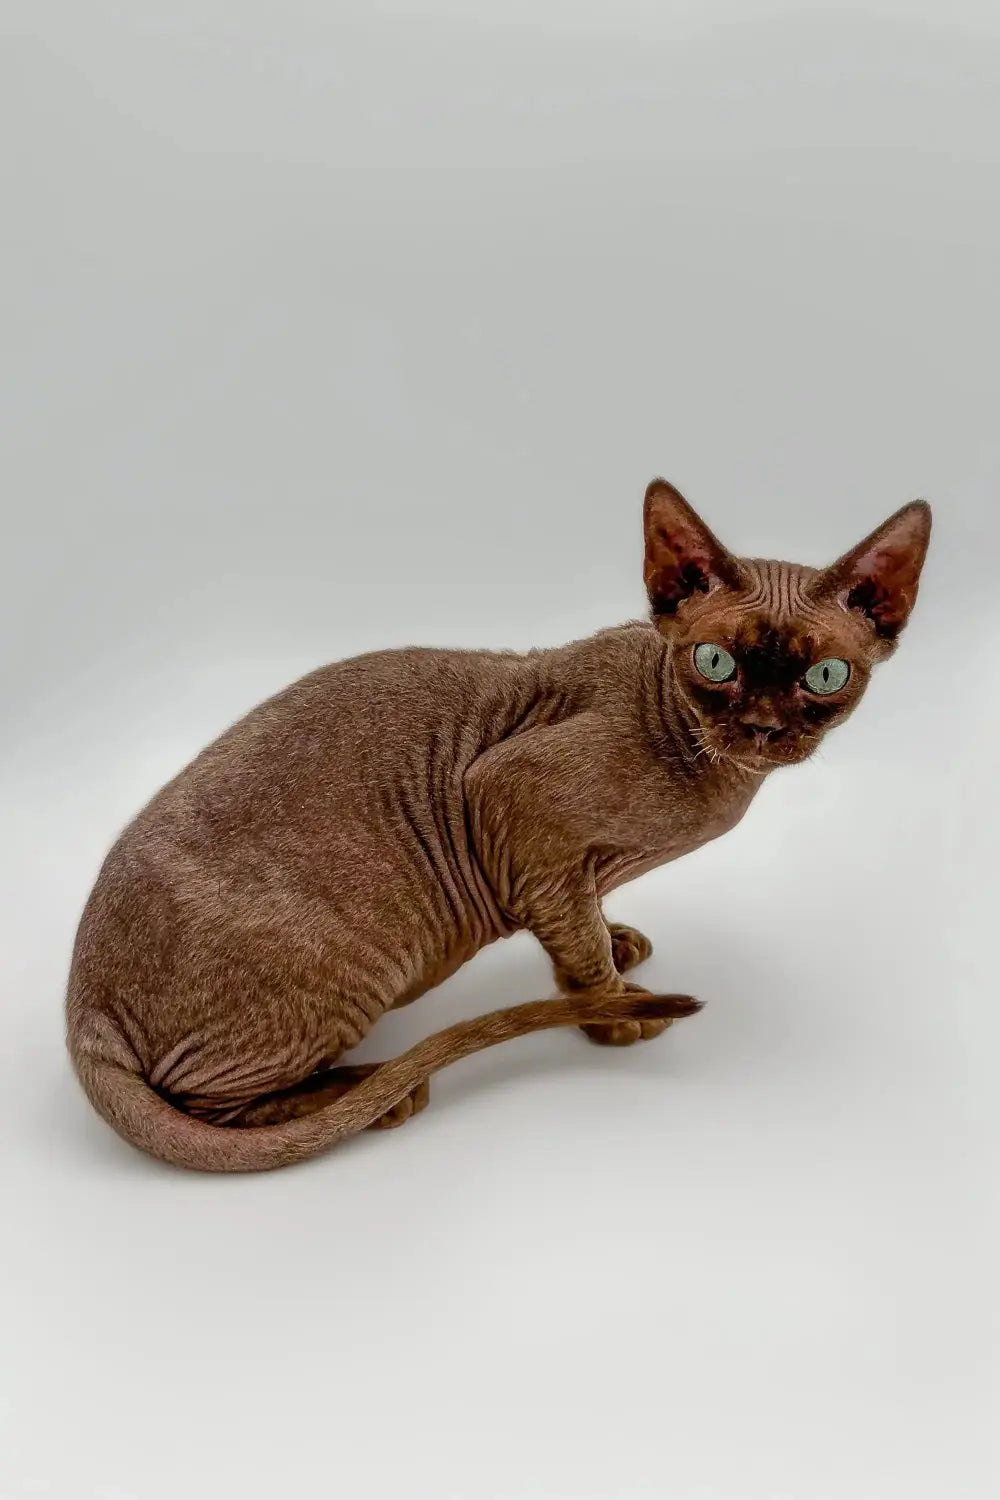 What Is Your Devon Rex Cat Trying to Tell You? Decoding Their Behavior